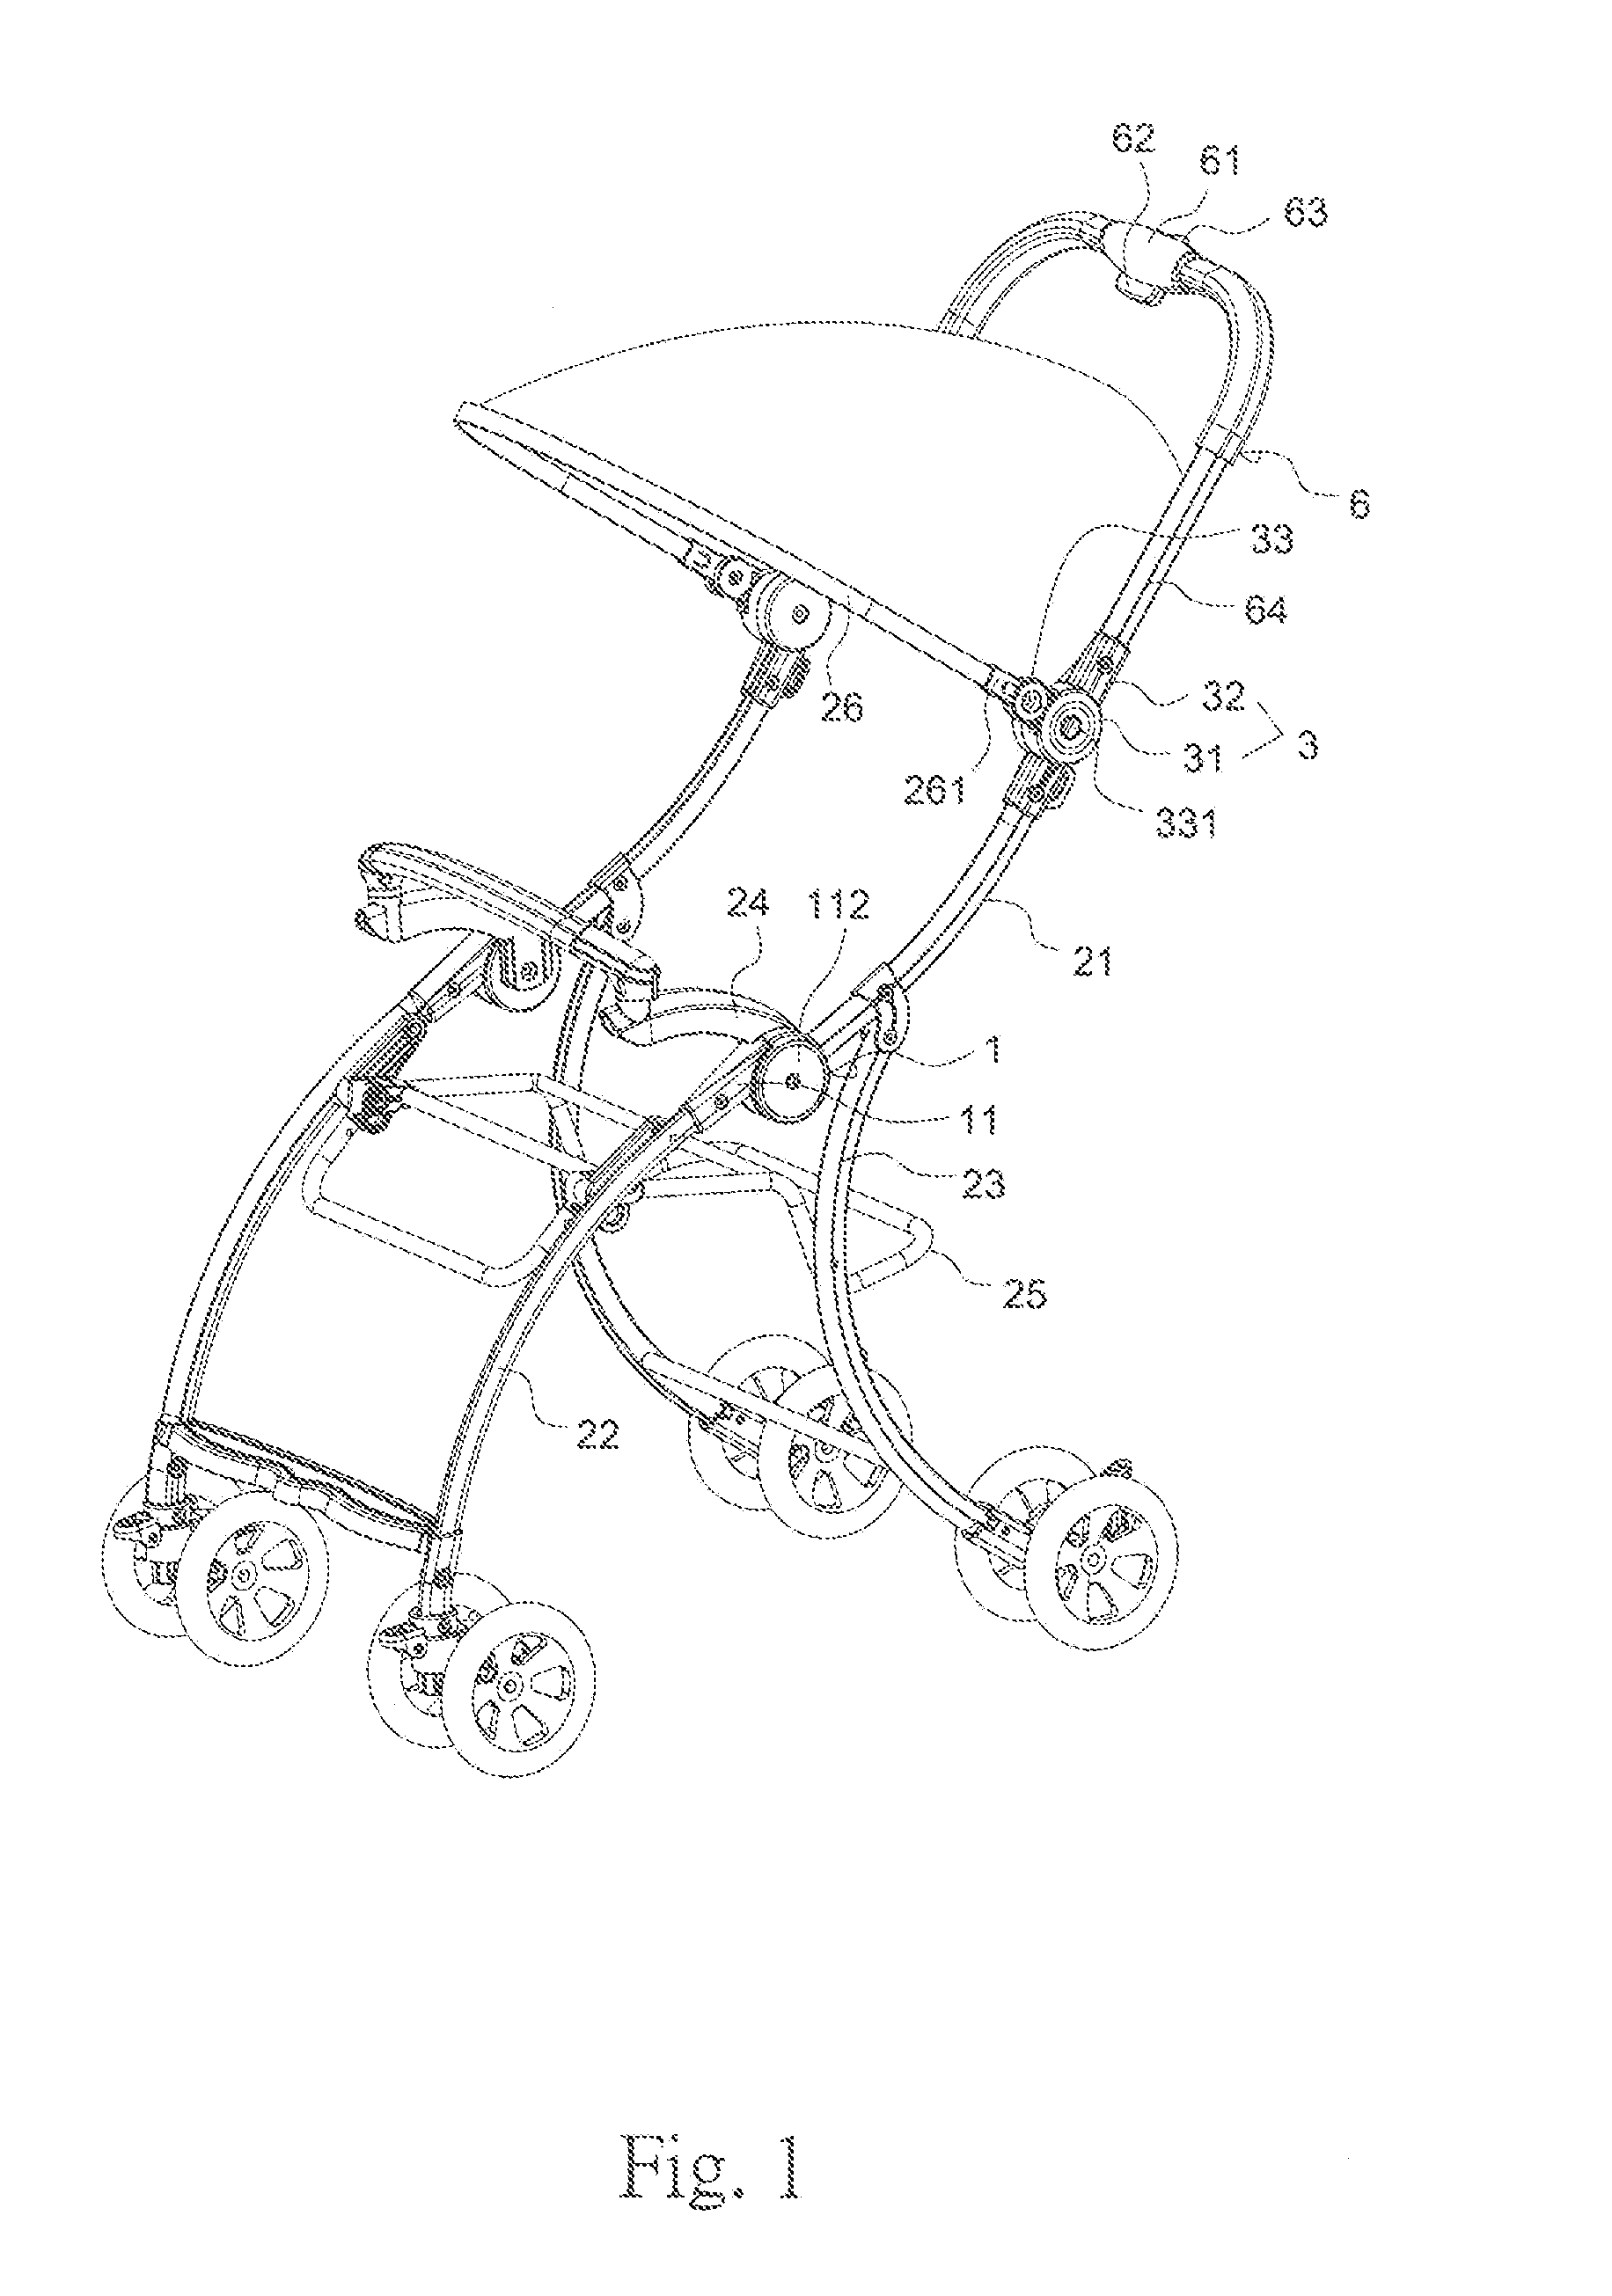 Interlocking folding component and method thereof for strollers